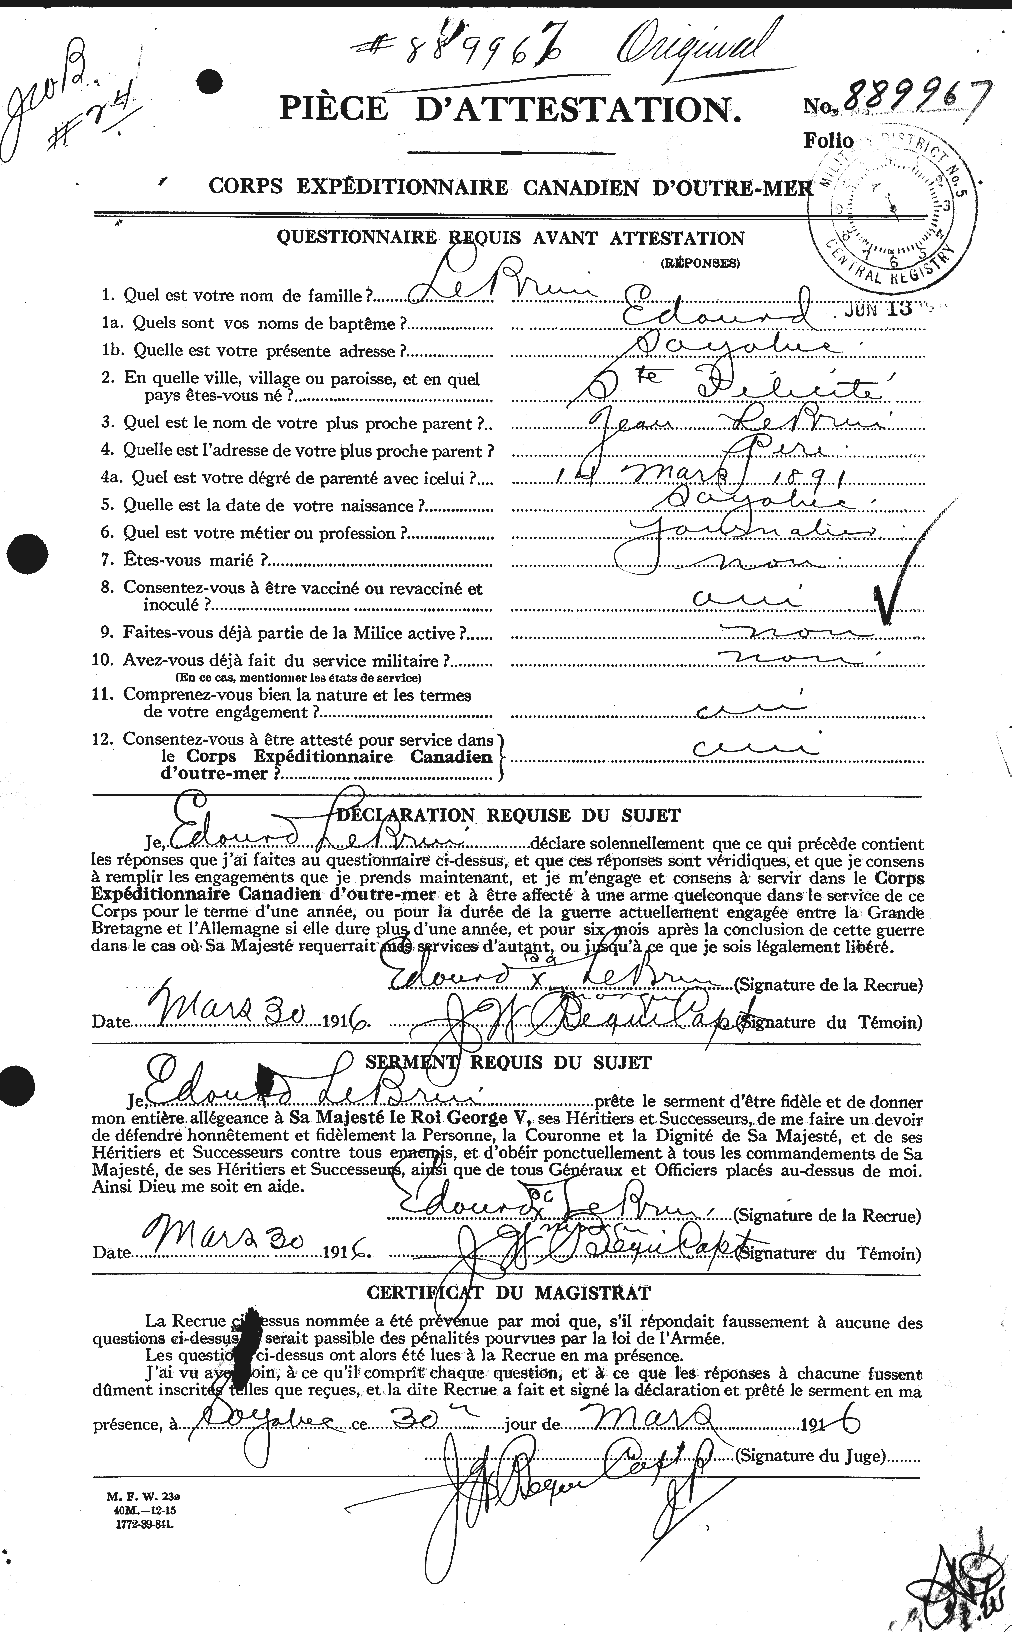 Personnel Records of the First World War - CEF 461554a